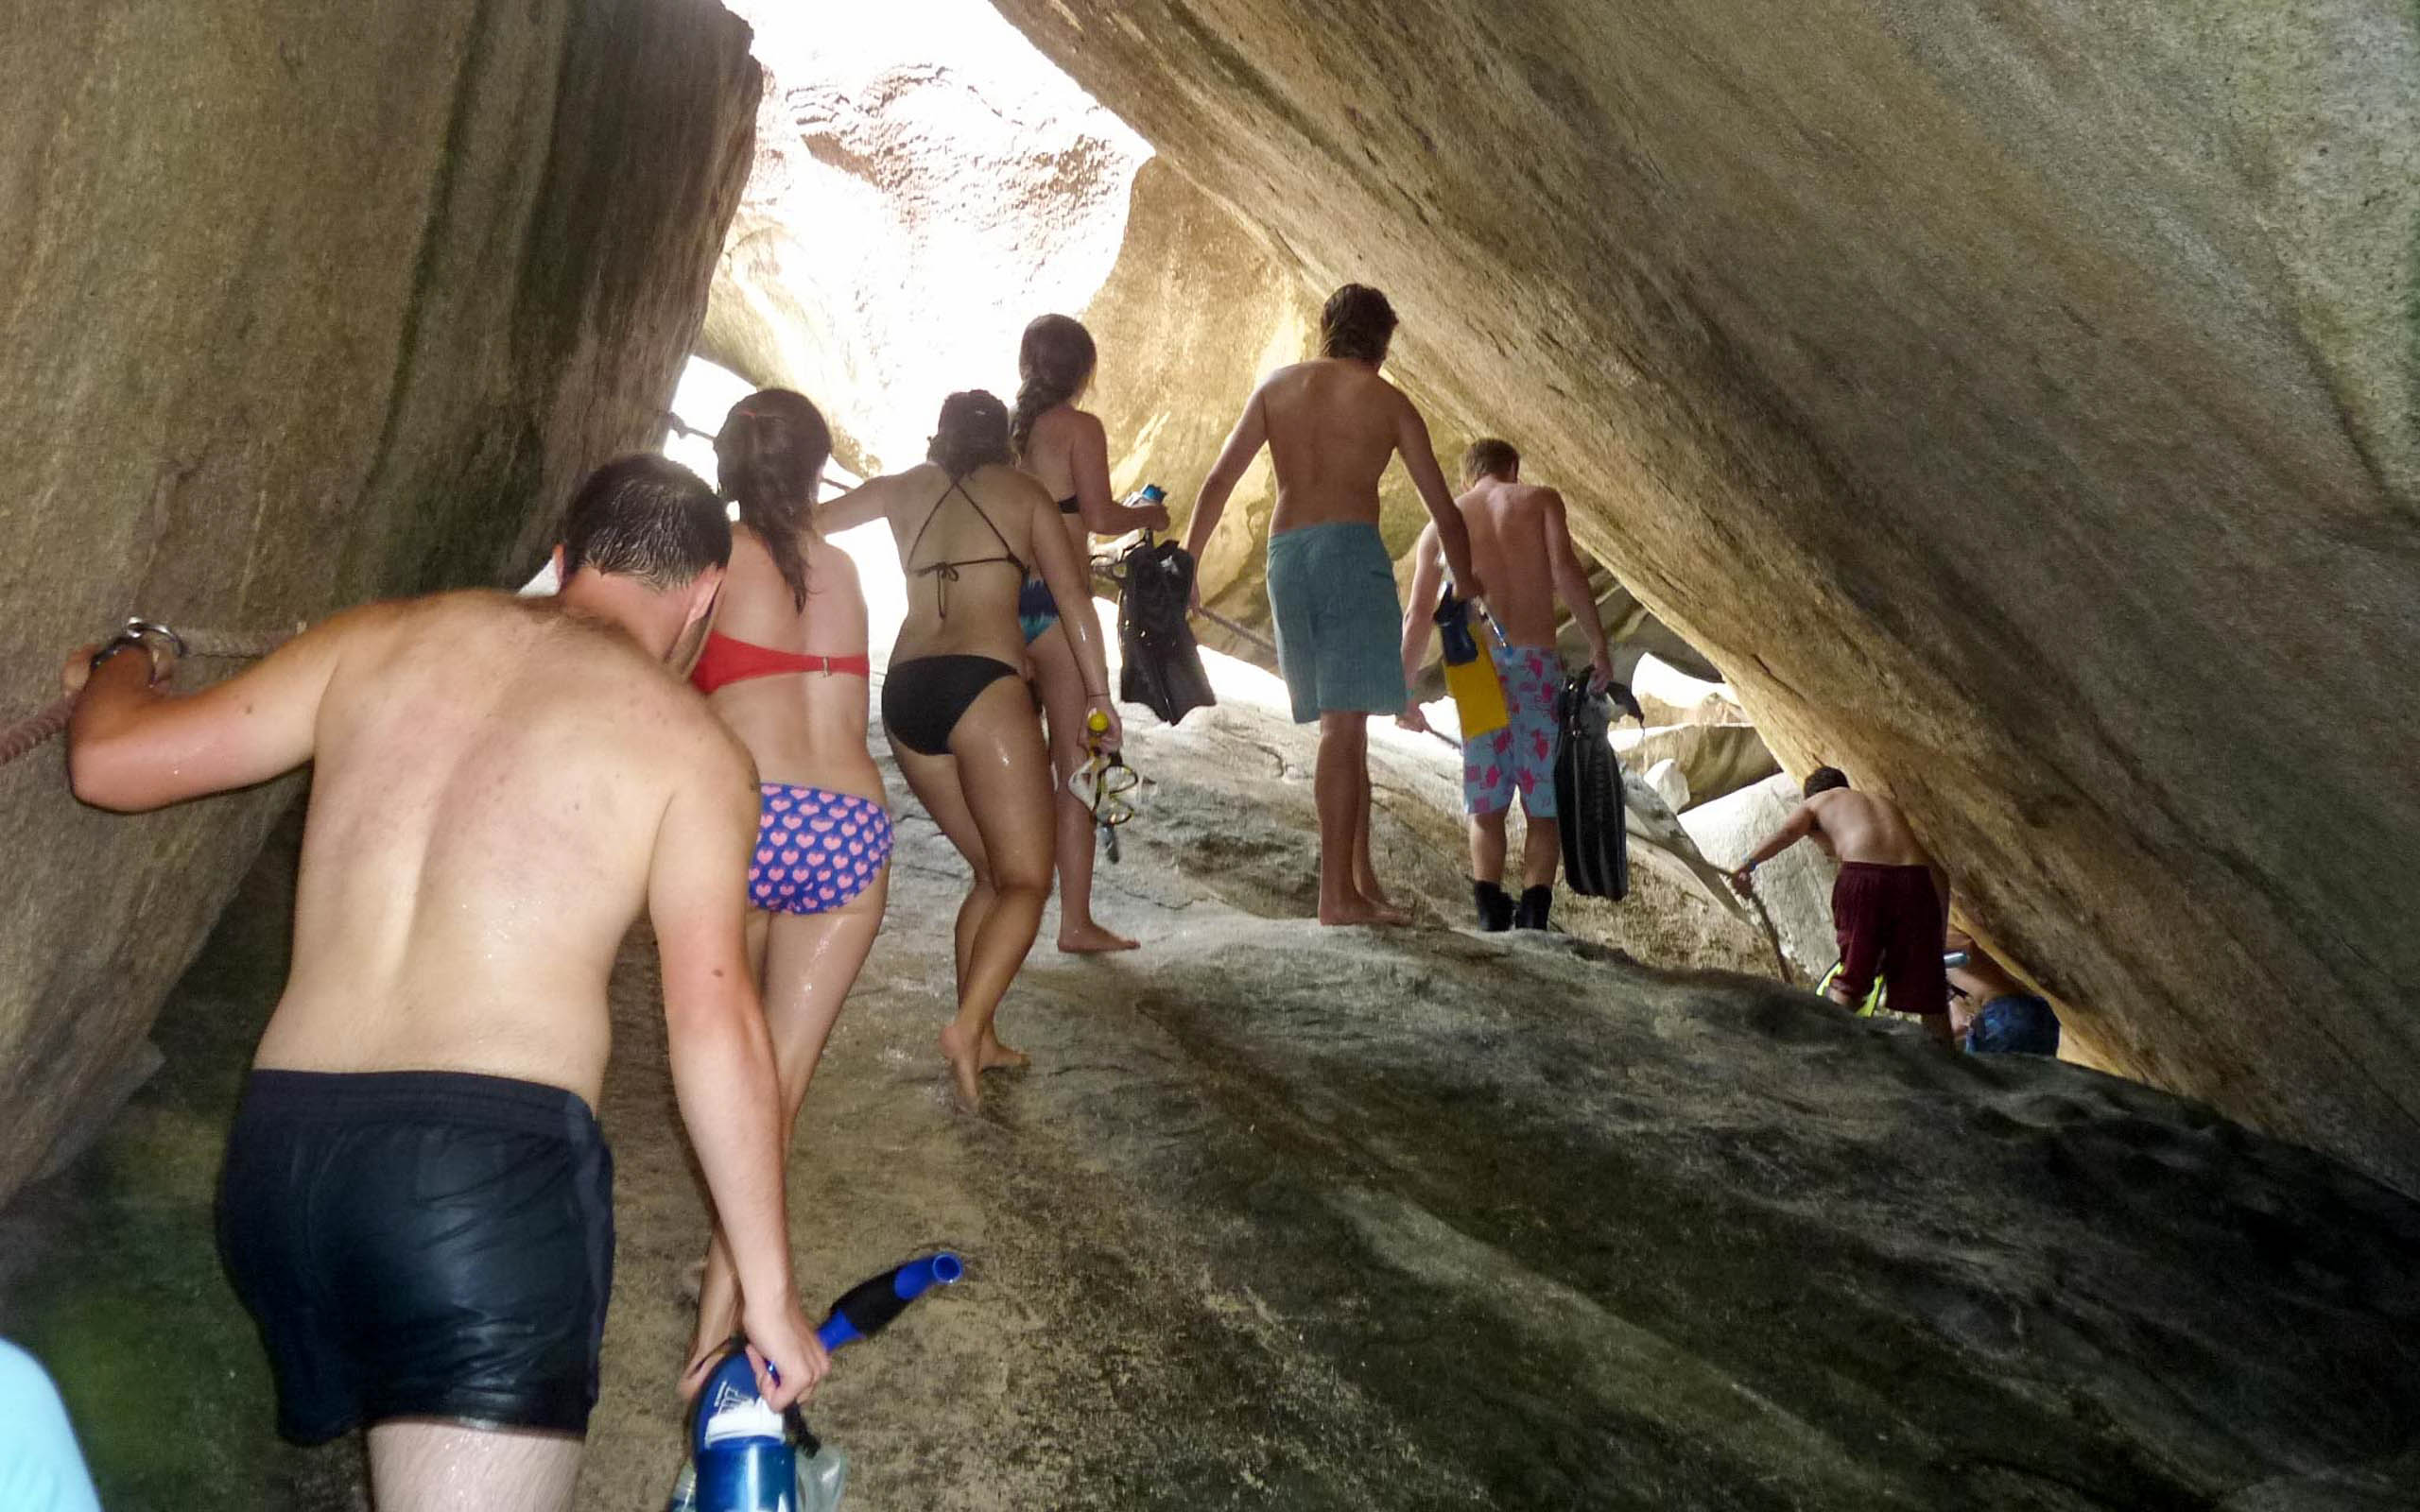 A group of people walking through a cave.